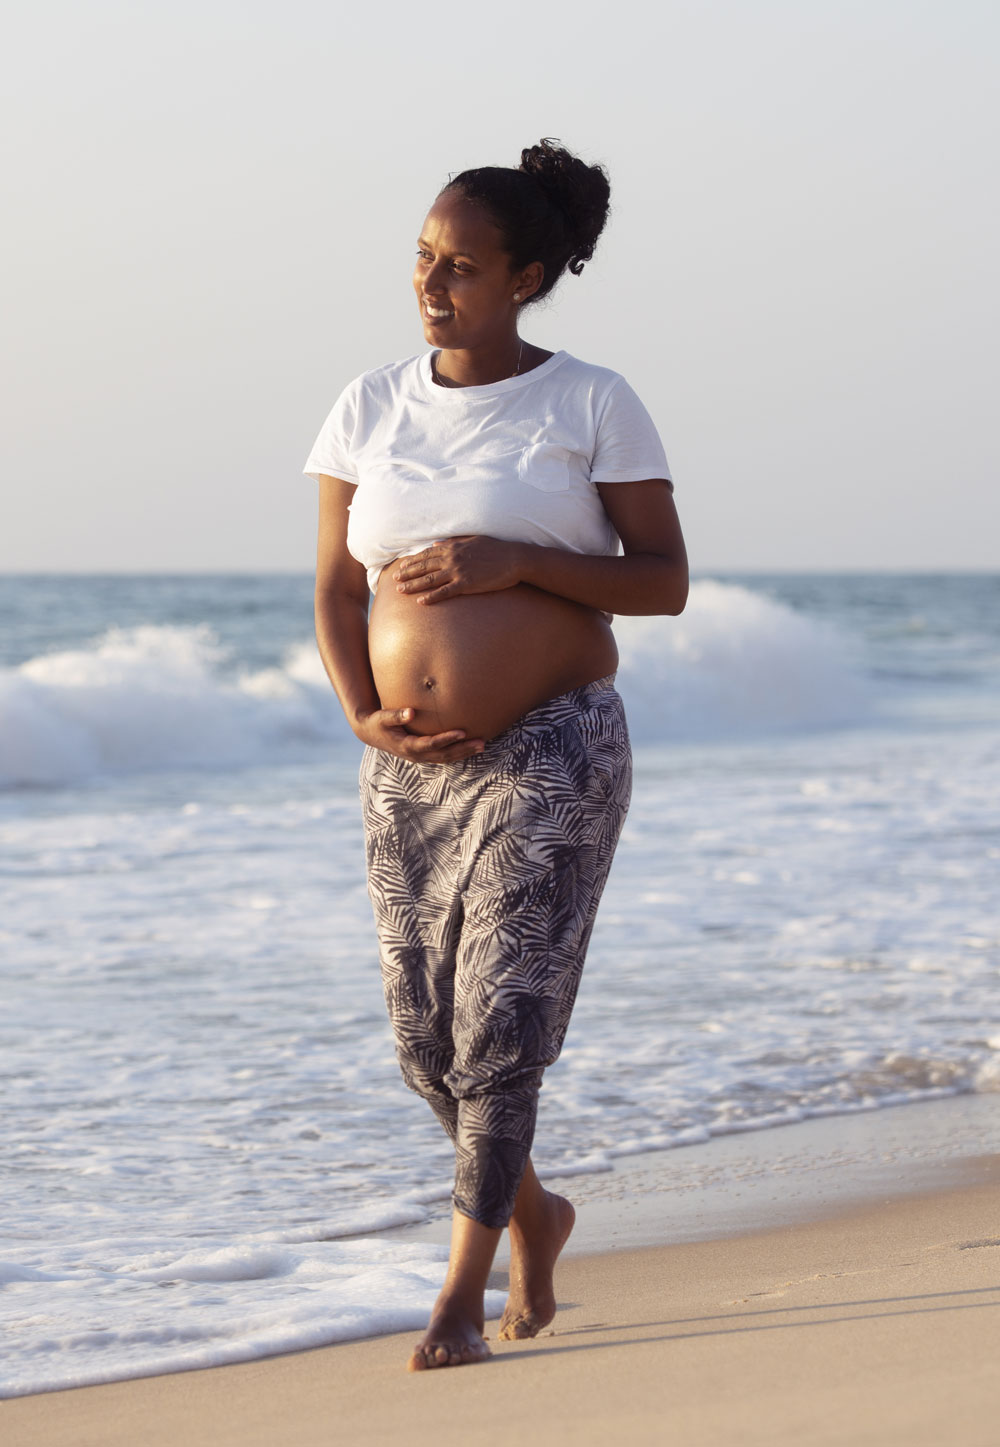 Pregnancy Changes the Body: Here’s What That Means for Gait, Balance, and Falls